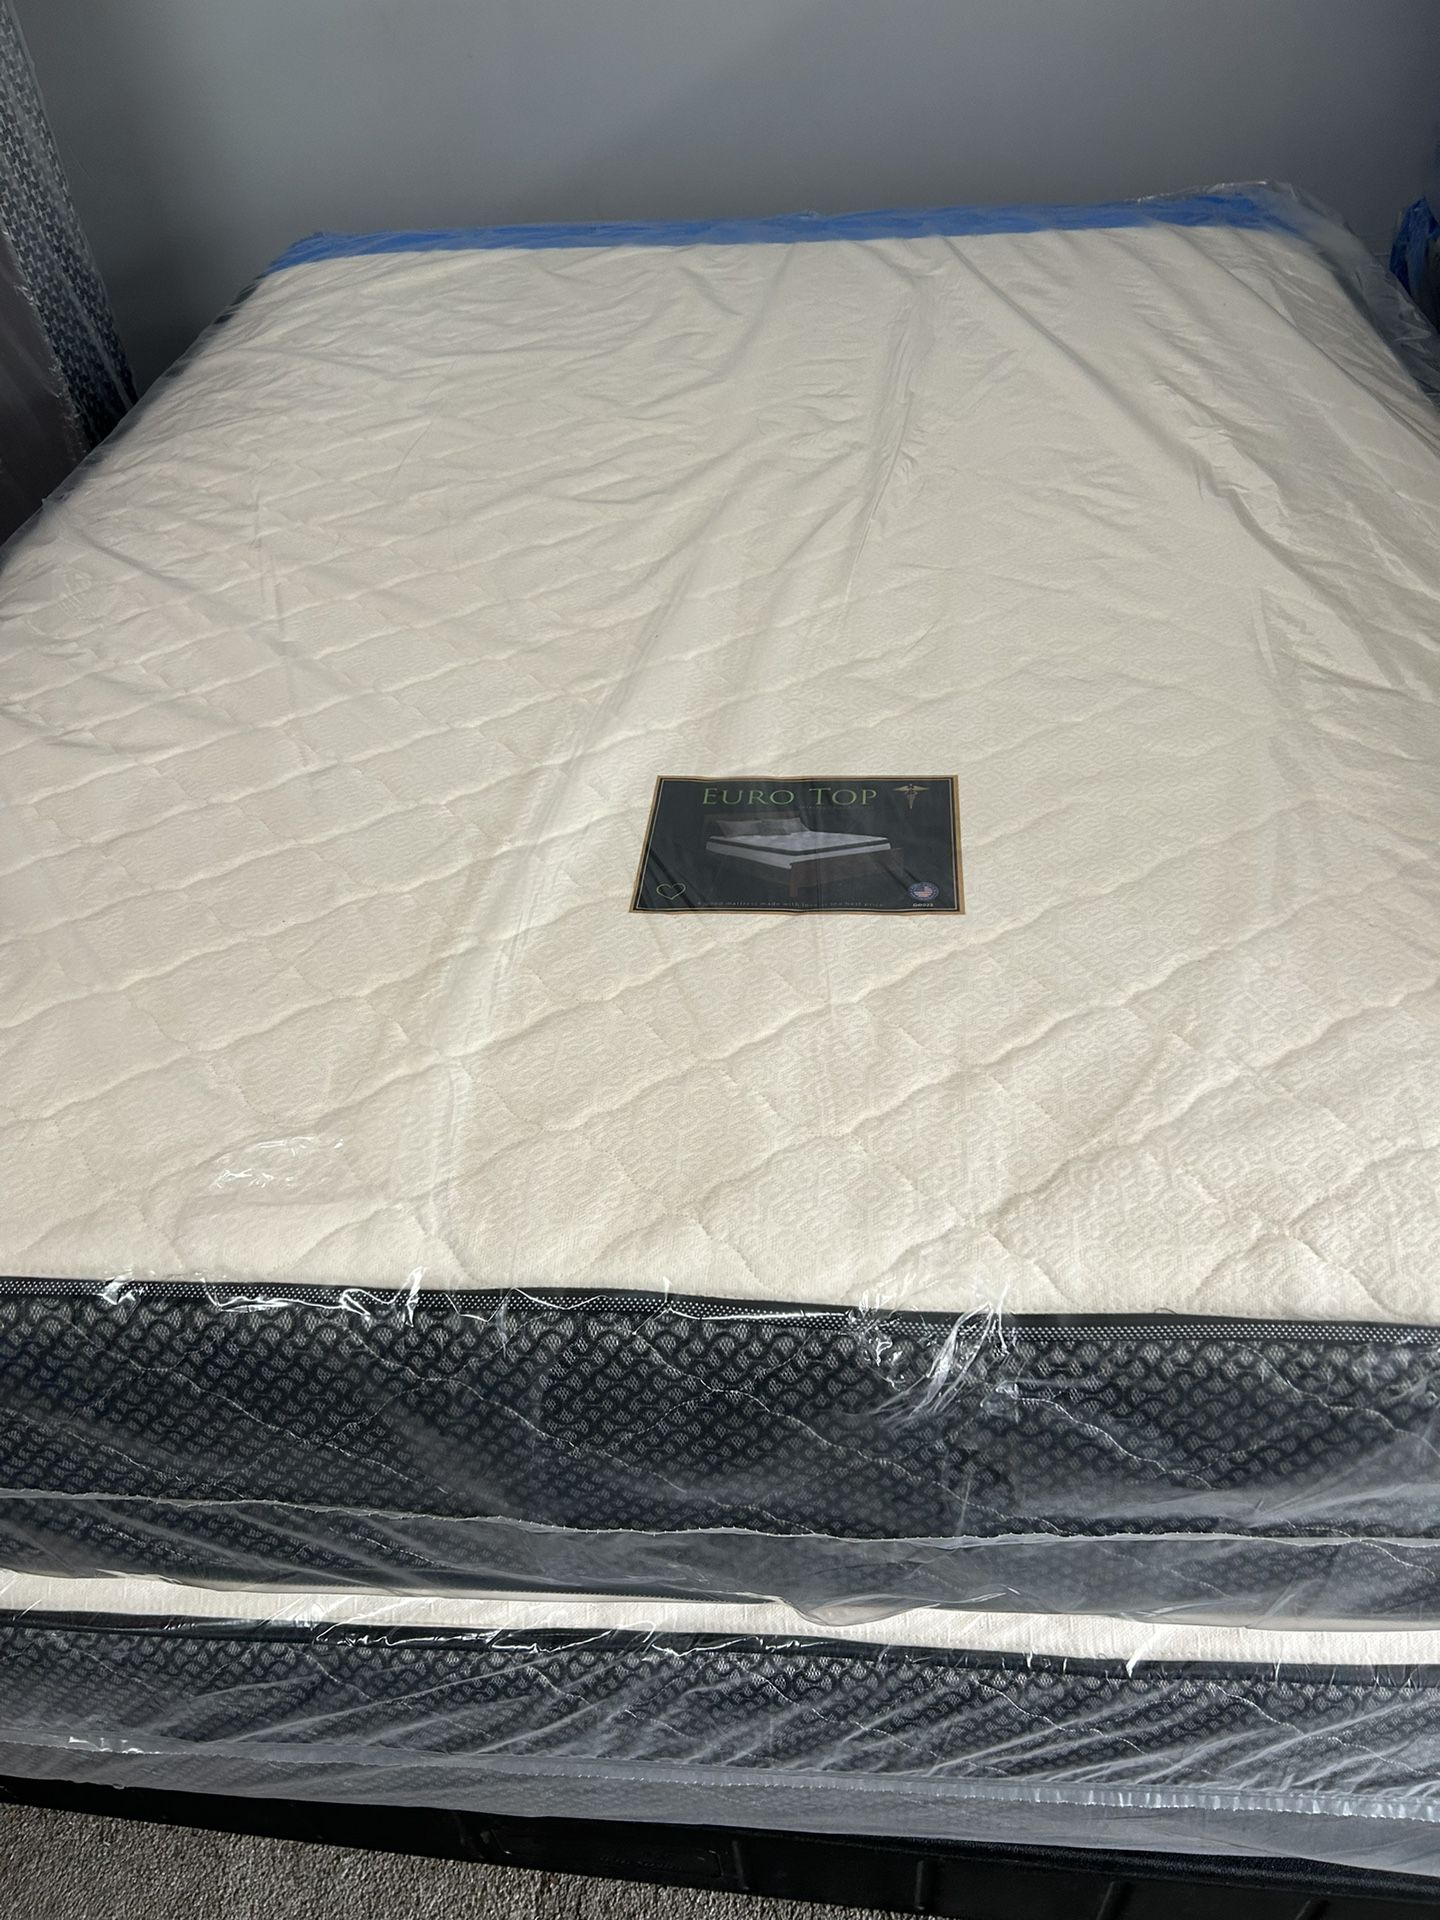 QUEEN SIZE MATTRESS BRAND NEW COMFORTABLE 11 INCHE AVAILABLE ALL SIZES LOCAL 303 POCASSET AVE PROVIDENCE RI OPEN 7 DAY 